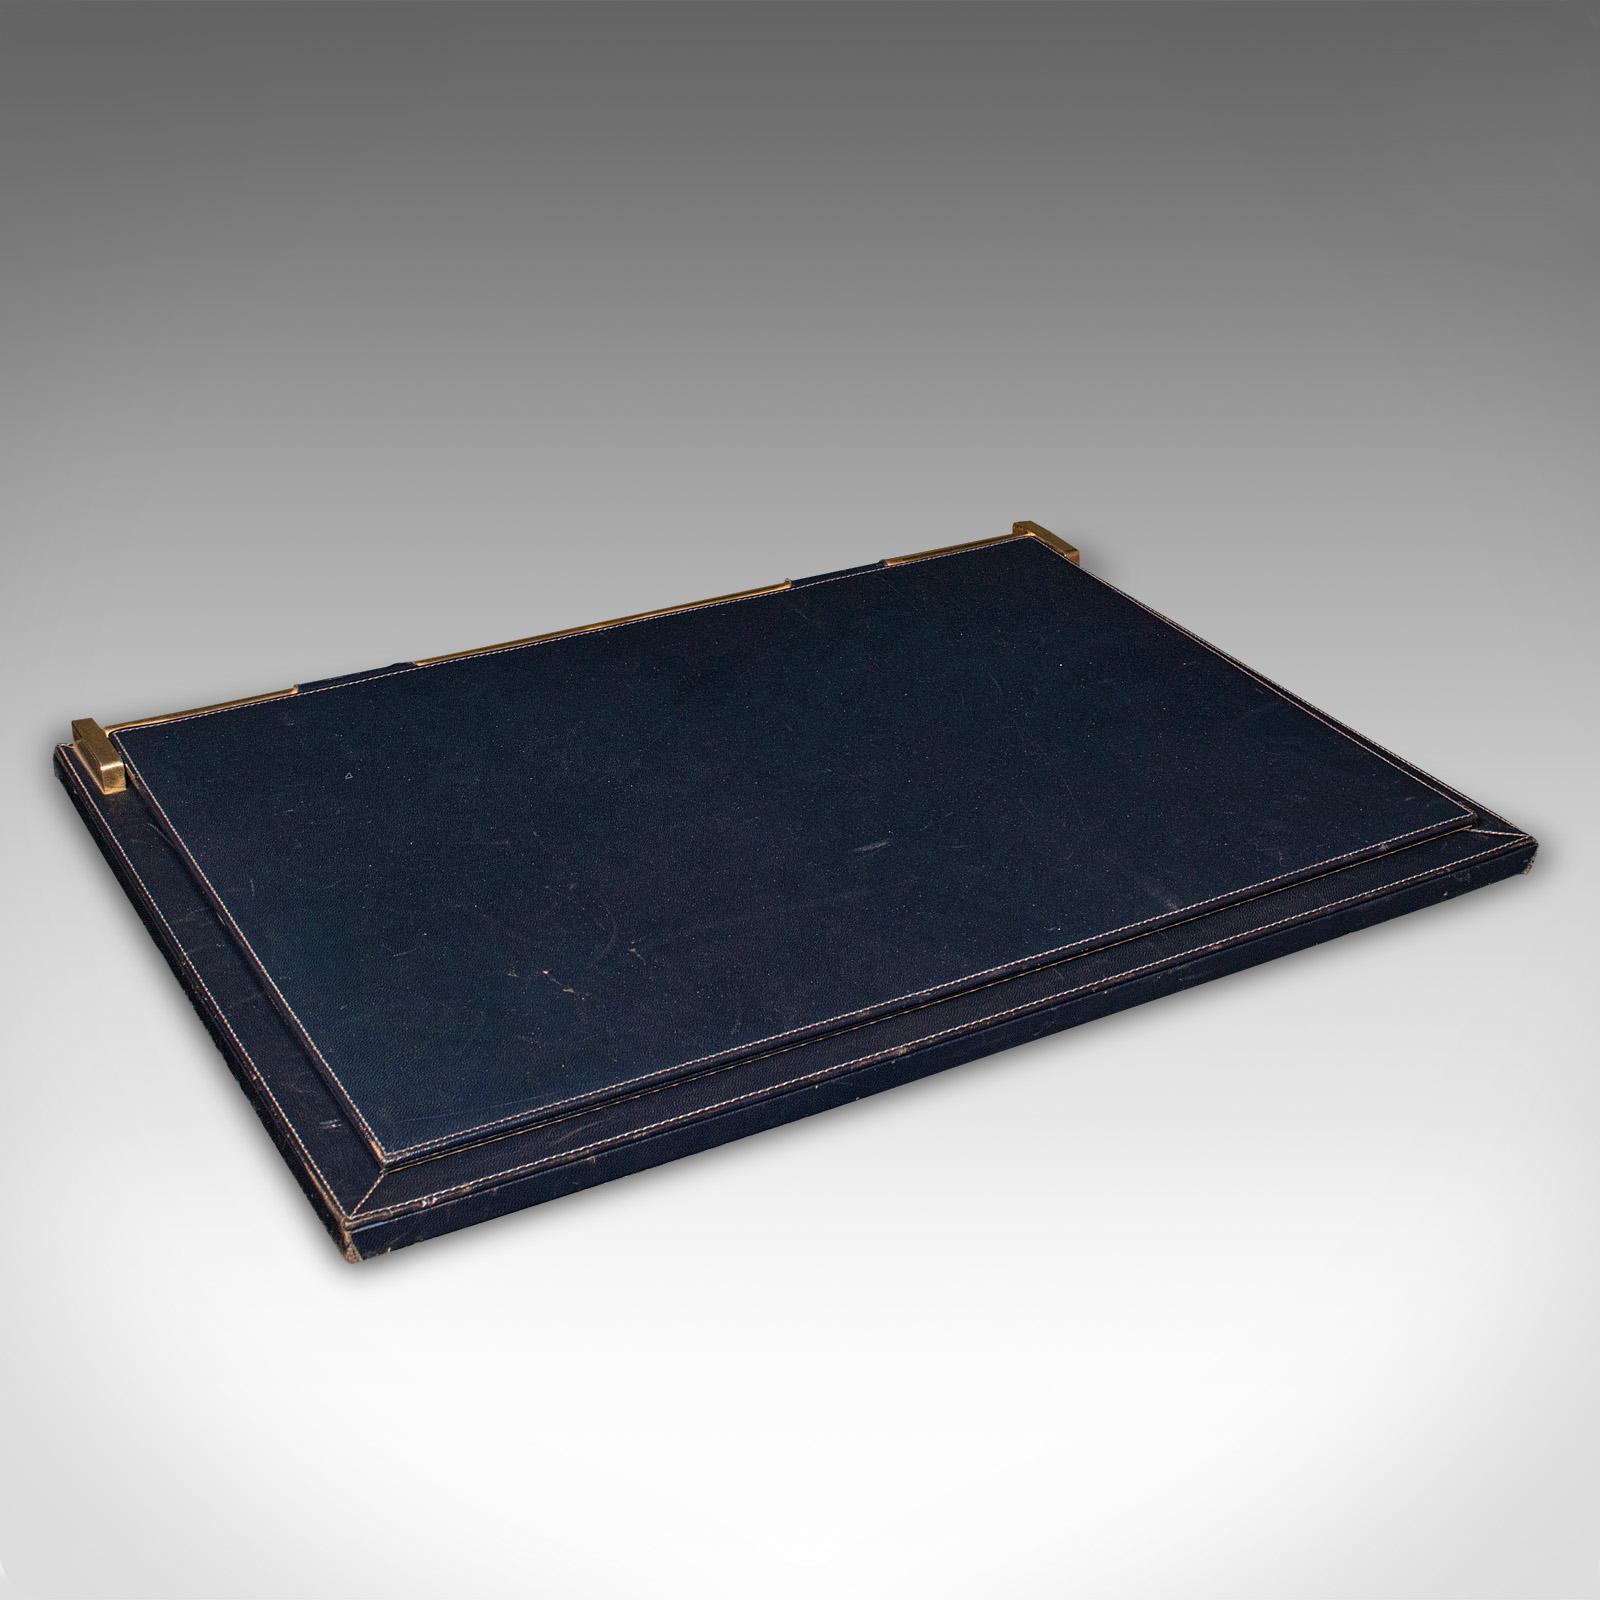 This is a vintage executive's desk pad. An Italian, leather and fabric desktop blotter dating to the late 20th century, circa 1980.

Executive elegance with appealing colour and clean appearance
Displays a desirable aged patina and in good